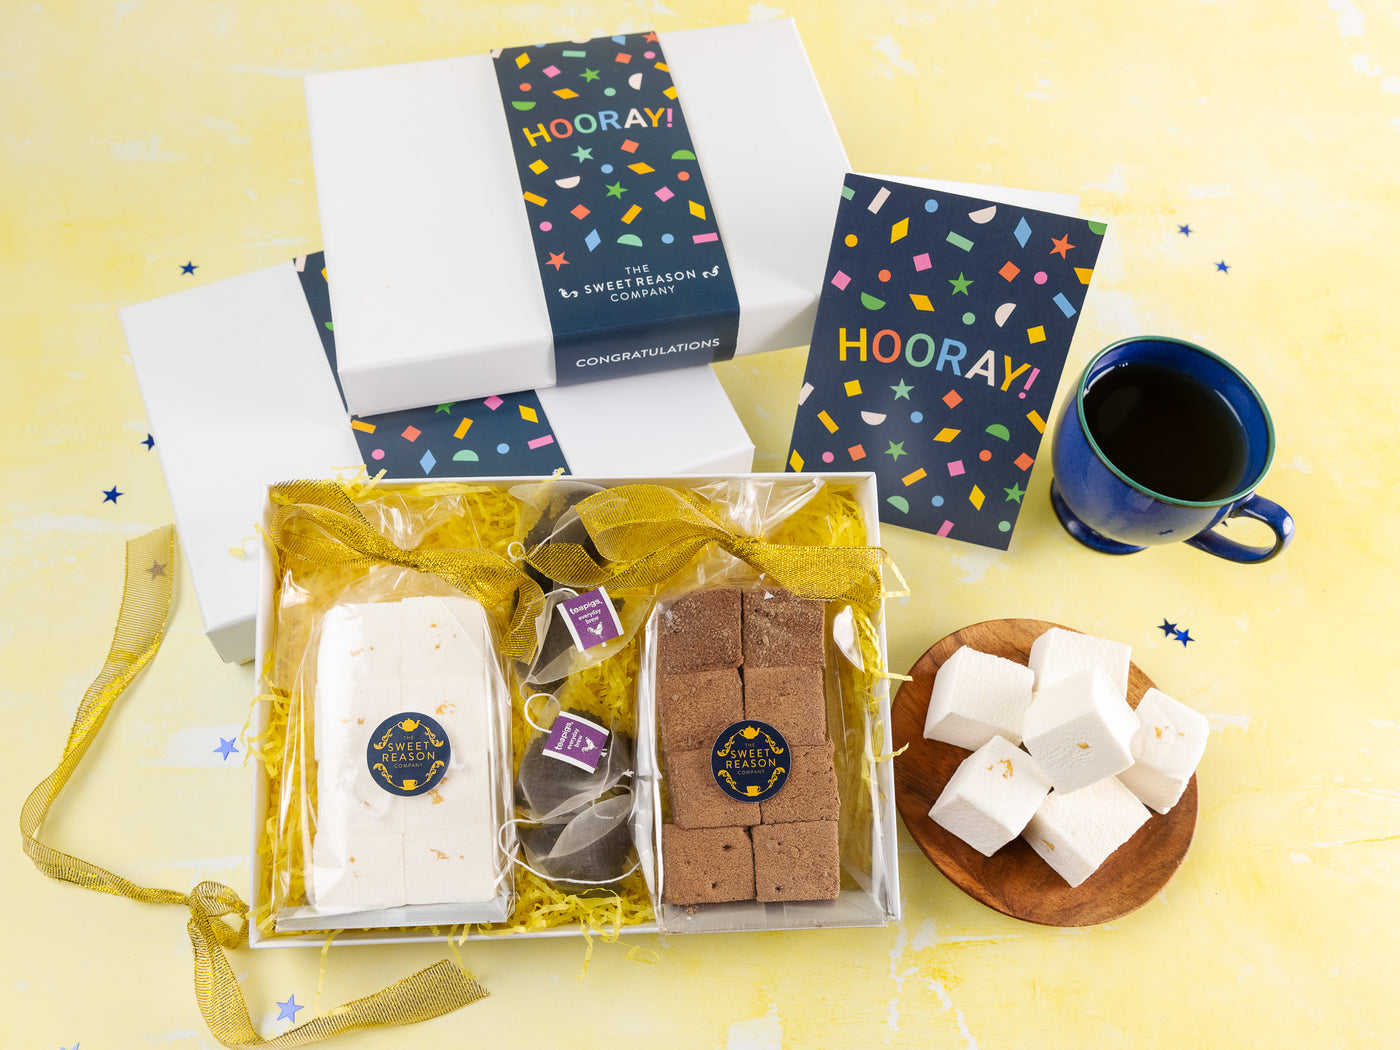 'Hooray!' Champagne & Elderflower and Double Chocolate Marshmallows with Tea Gift